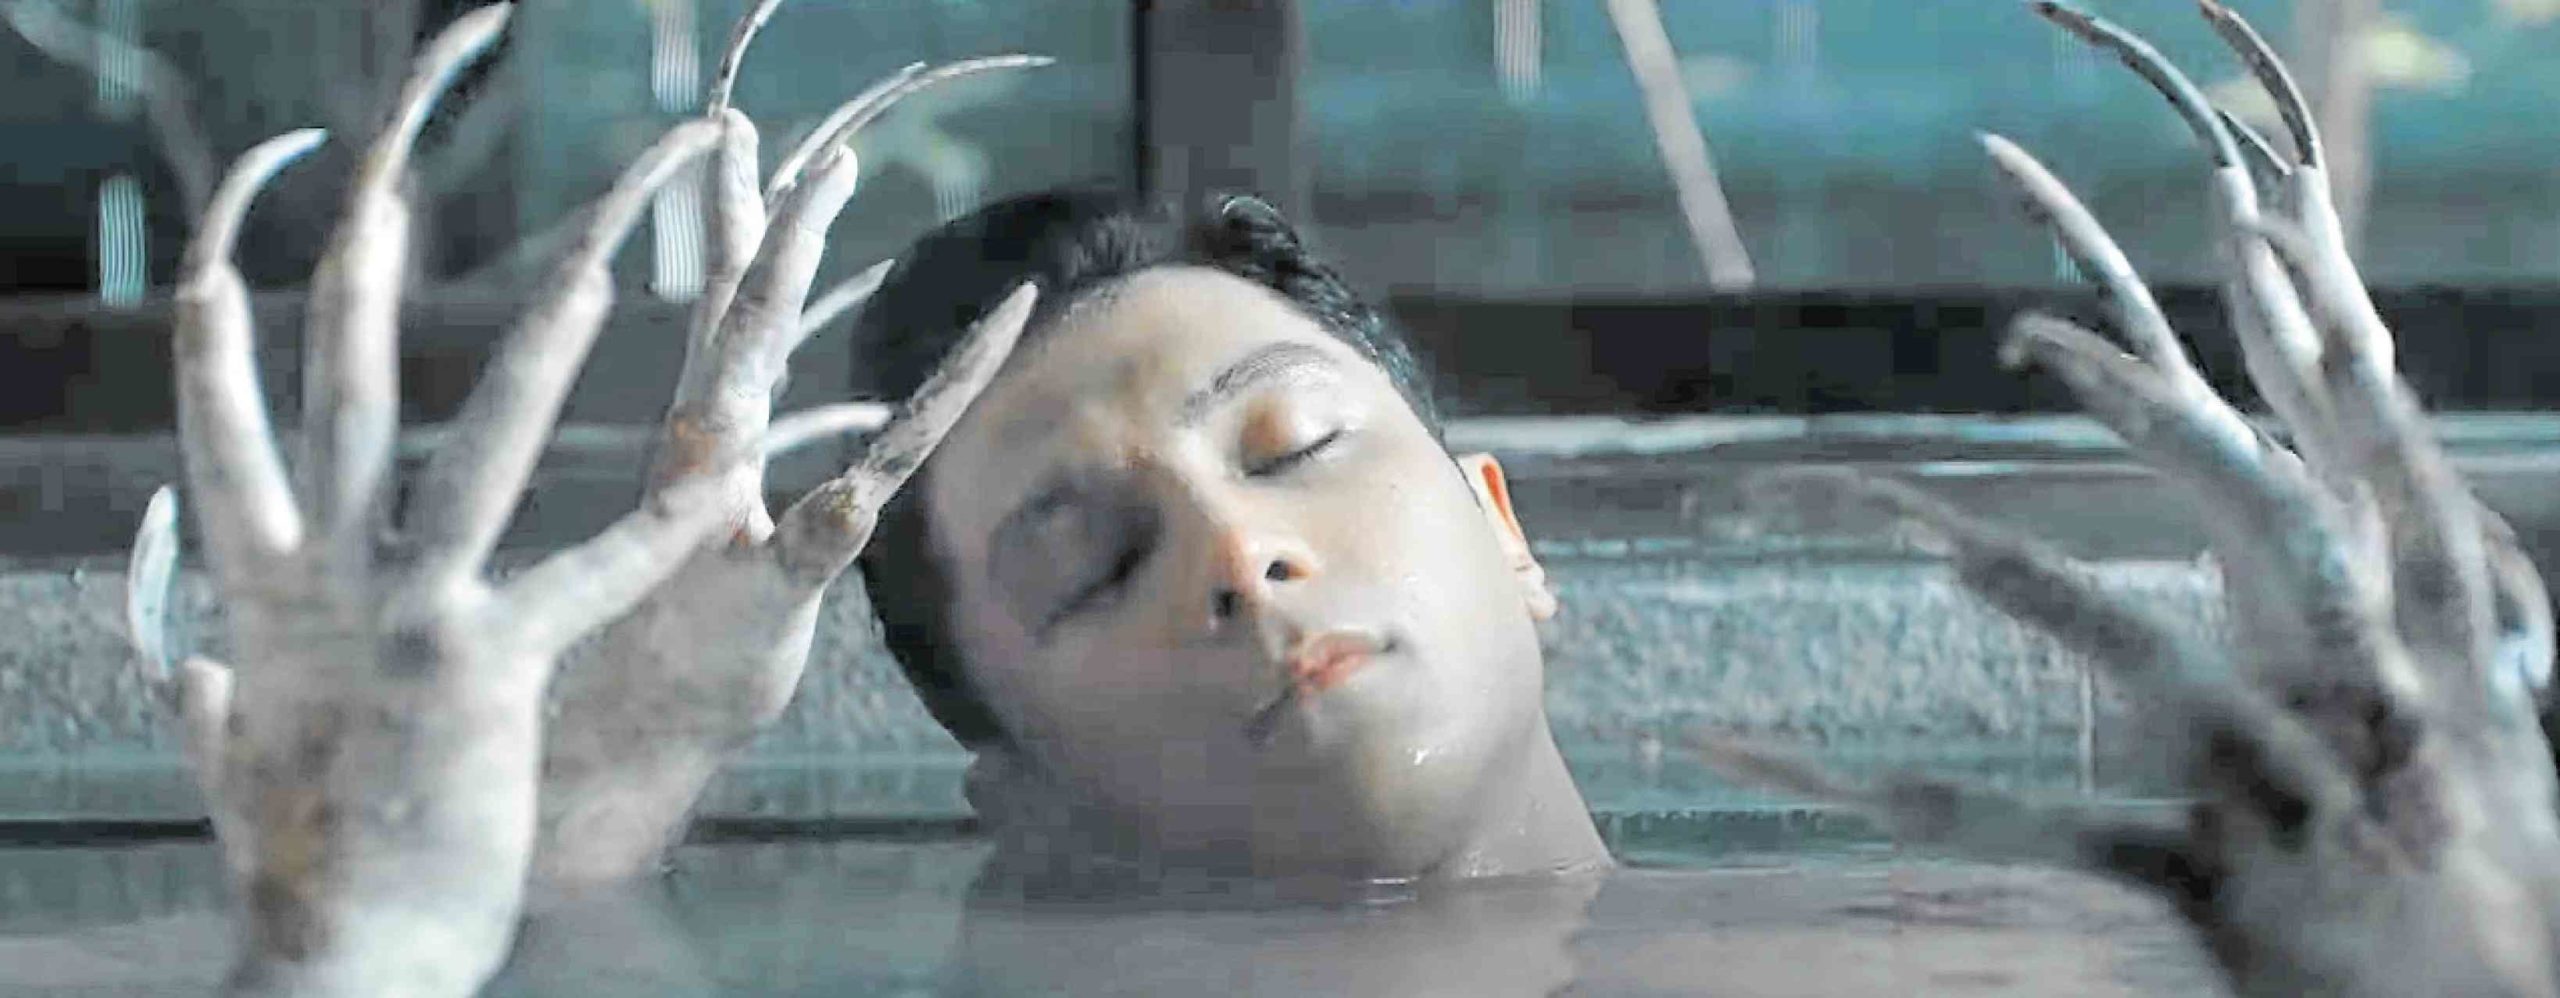 Joseph Marco in “The Missing”